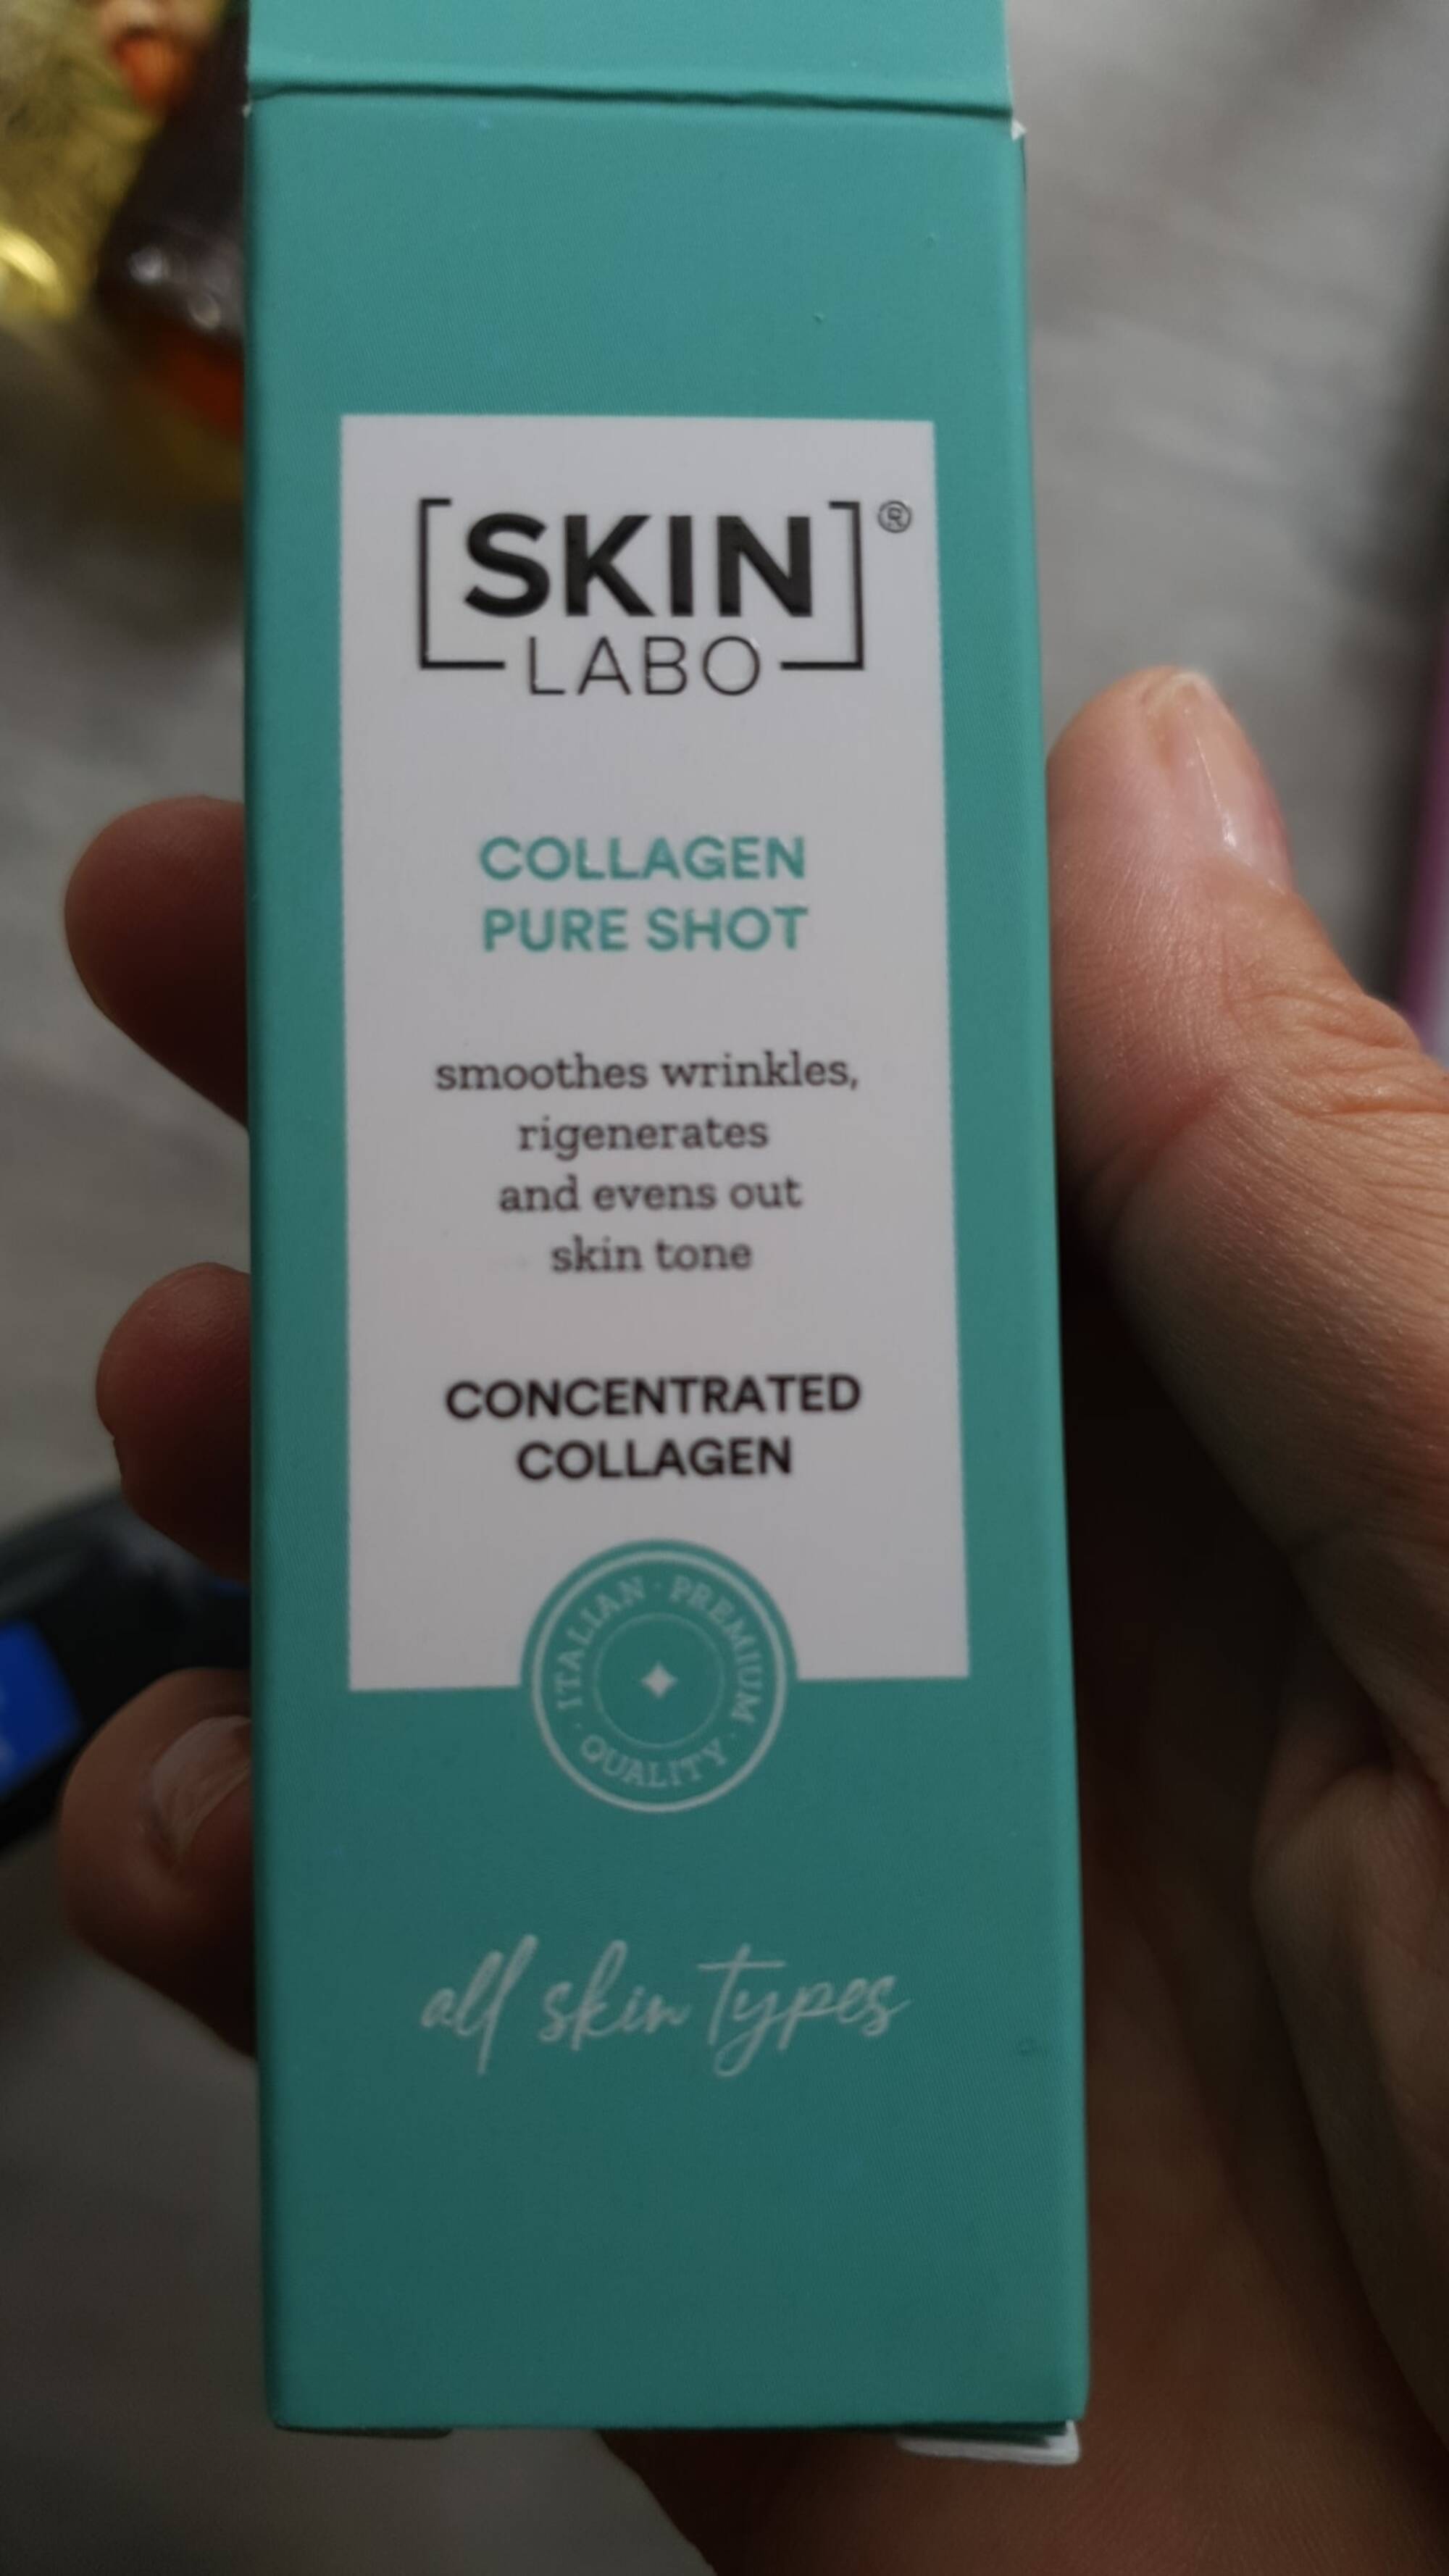 SKIN LABO - Collagen pure shot - Concentrated collagen